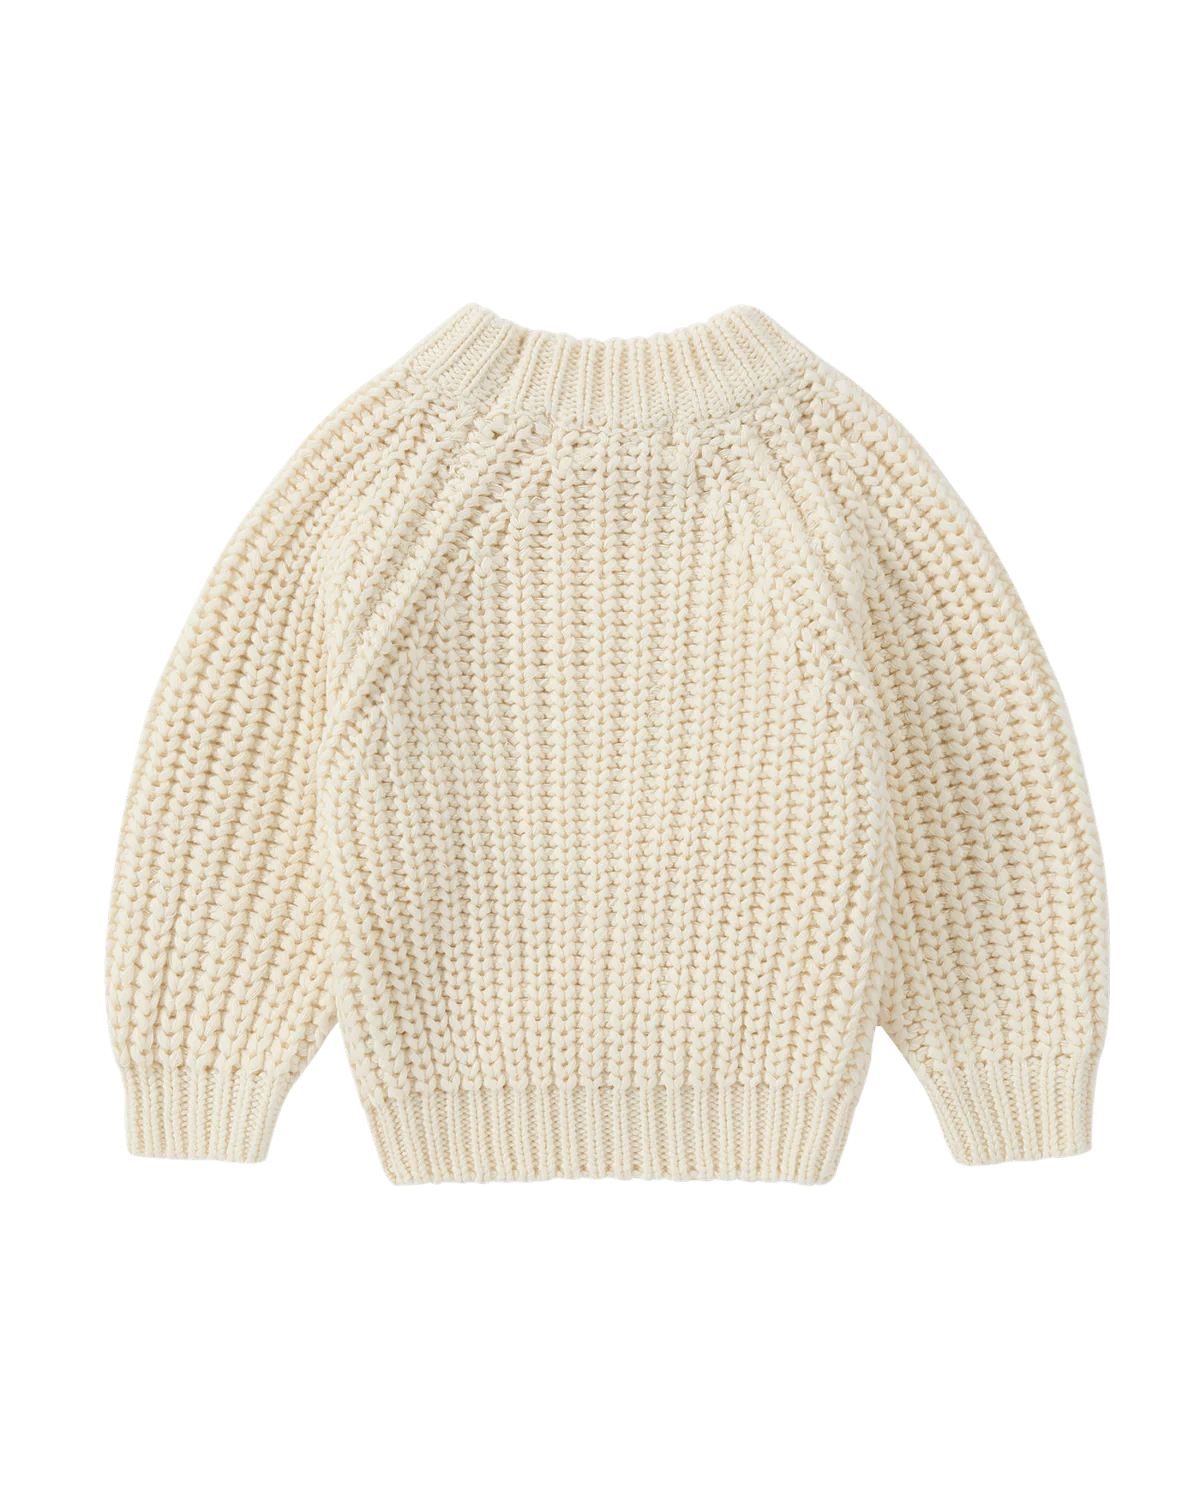 Chunky Knit Pullover in 2 Colours by Susukoshi